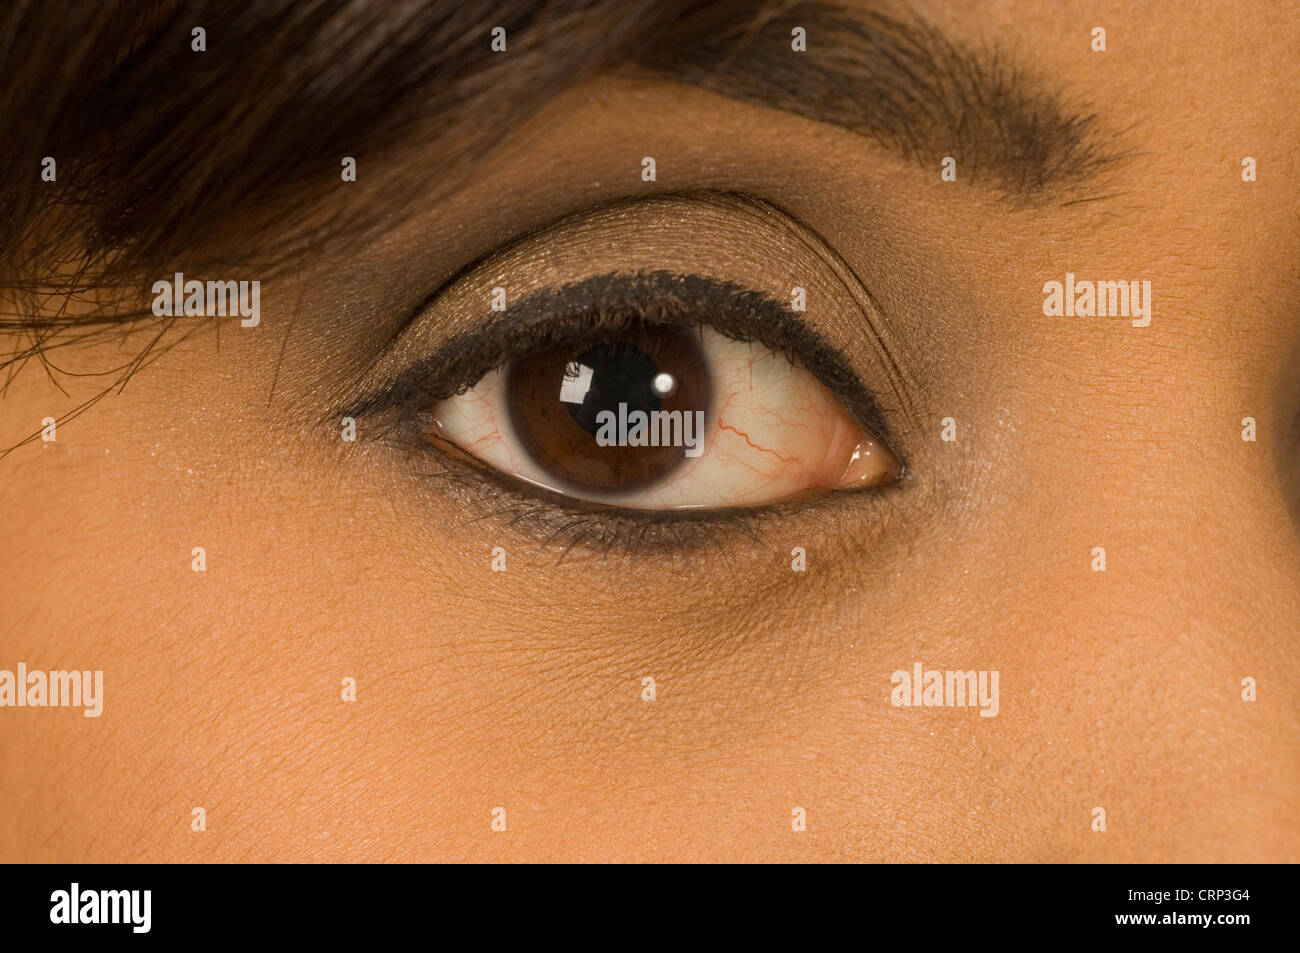 Close-up of a woman's healthy eye. Stock Photo